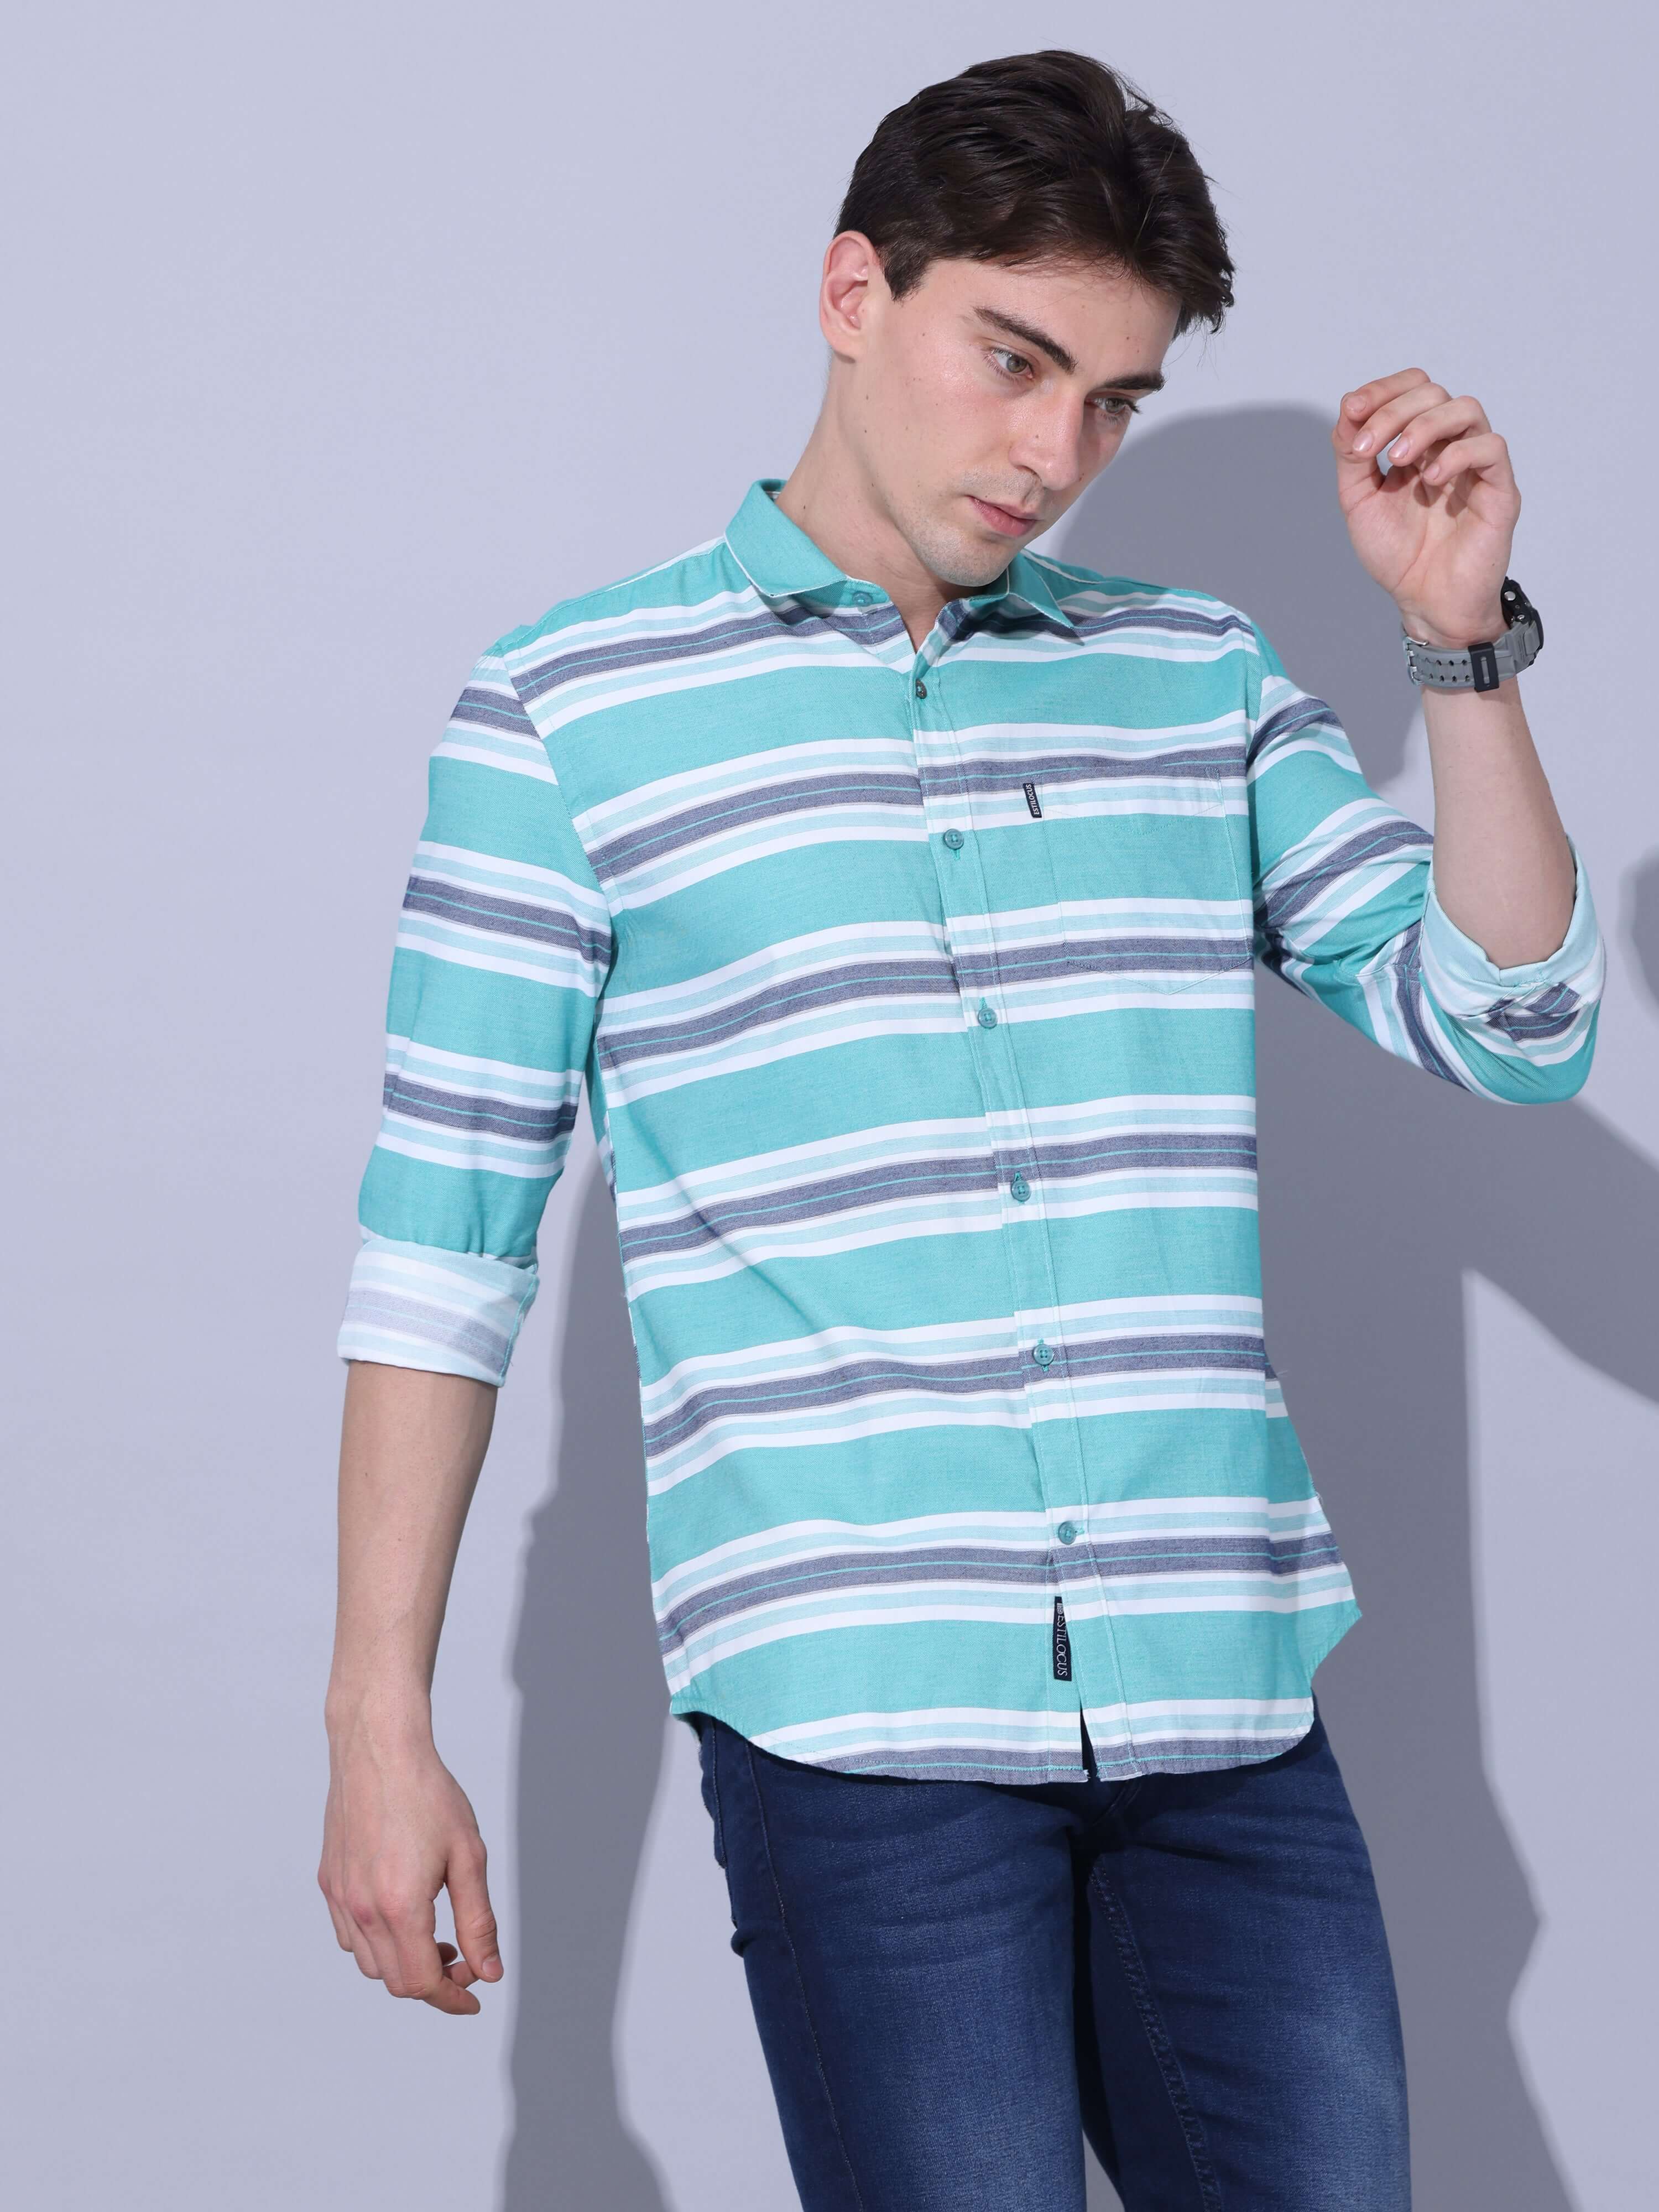 Green Stripe Casual Shirt shop online at Estilocus. •Geometric Stripe Print • Full sleeve shirt • Regular collar • Double button square cuff. • Single pocket with logo embroidery • Curved hemline • Finest quality sewing • Suitable to wear with all types o